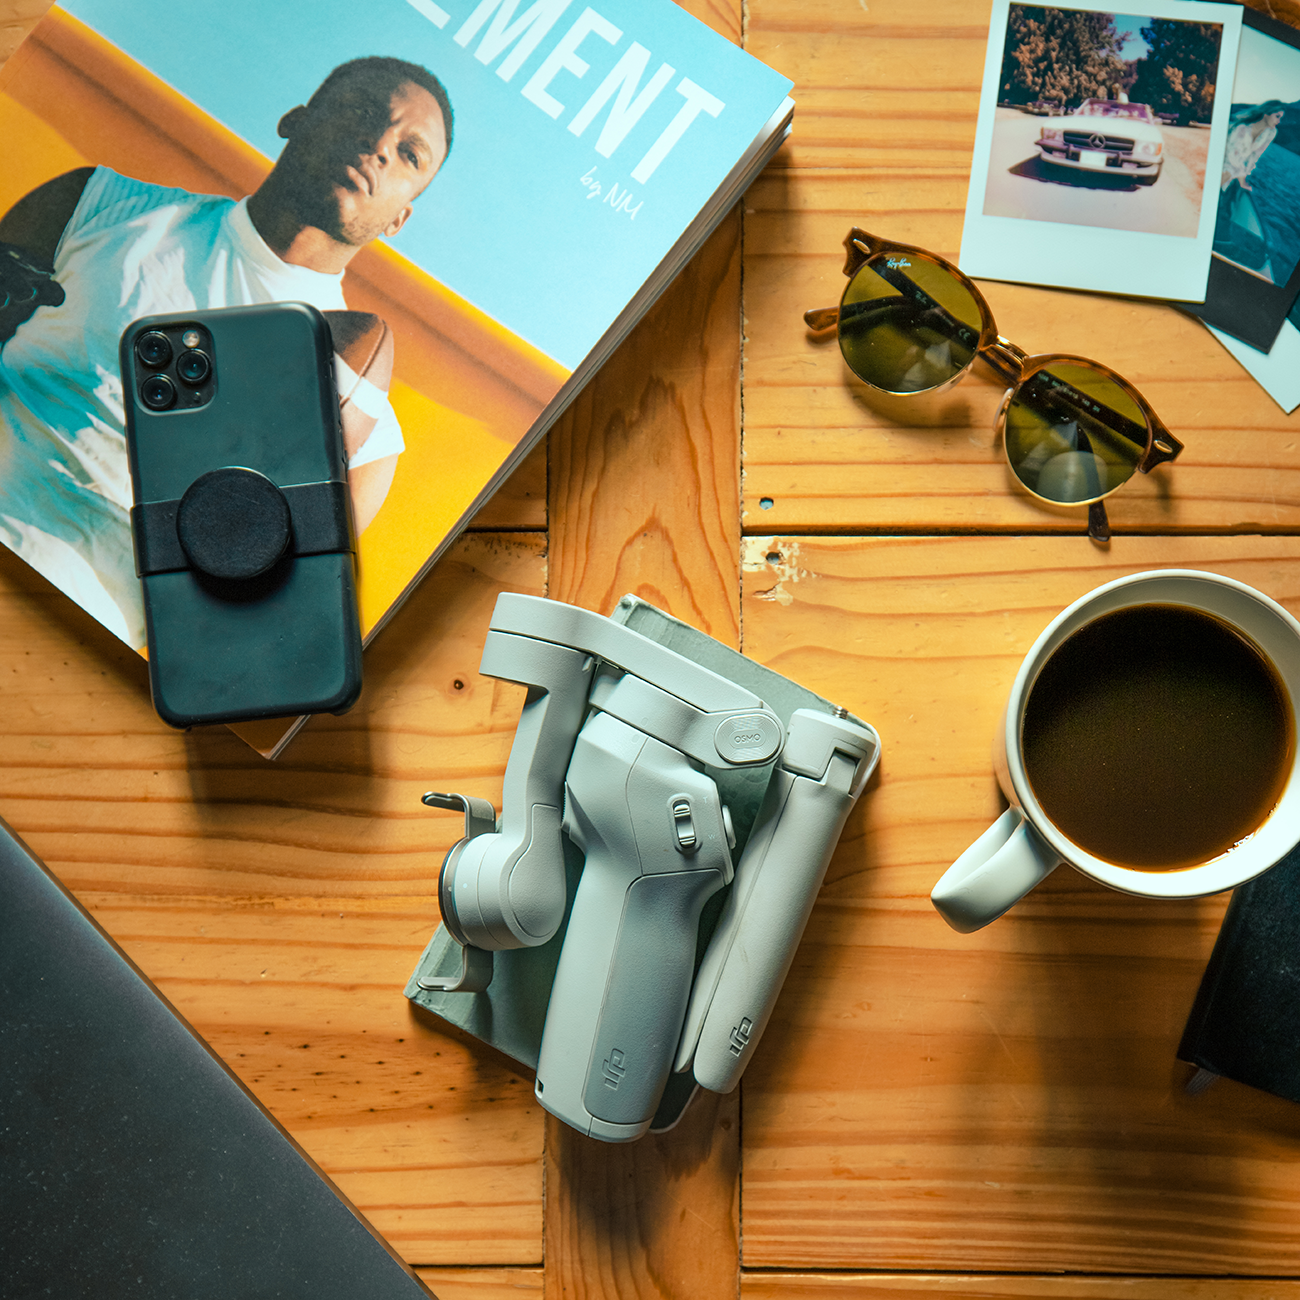 The DJI OM 4 on a table amongst a cup of coffee, a magazines, sunglasses and a phone